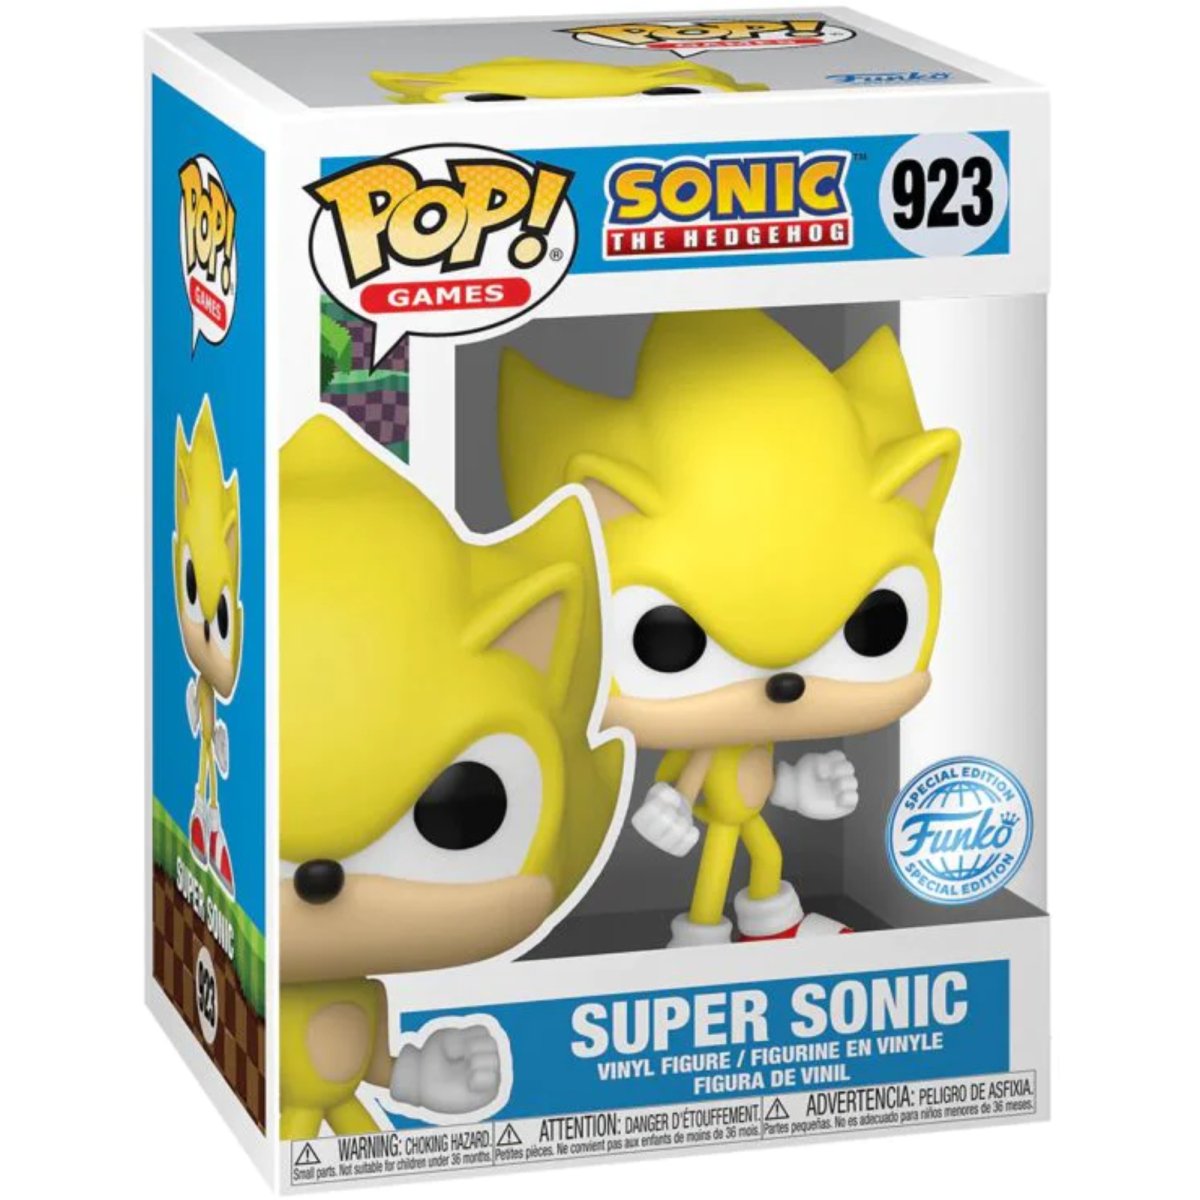 Sonic the Hedgehog - Super Sonic (Special Edition) #923 - Funko Pop! Vinyl Games - Persona Toys